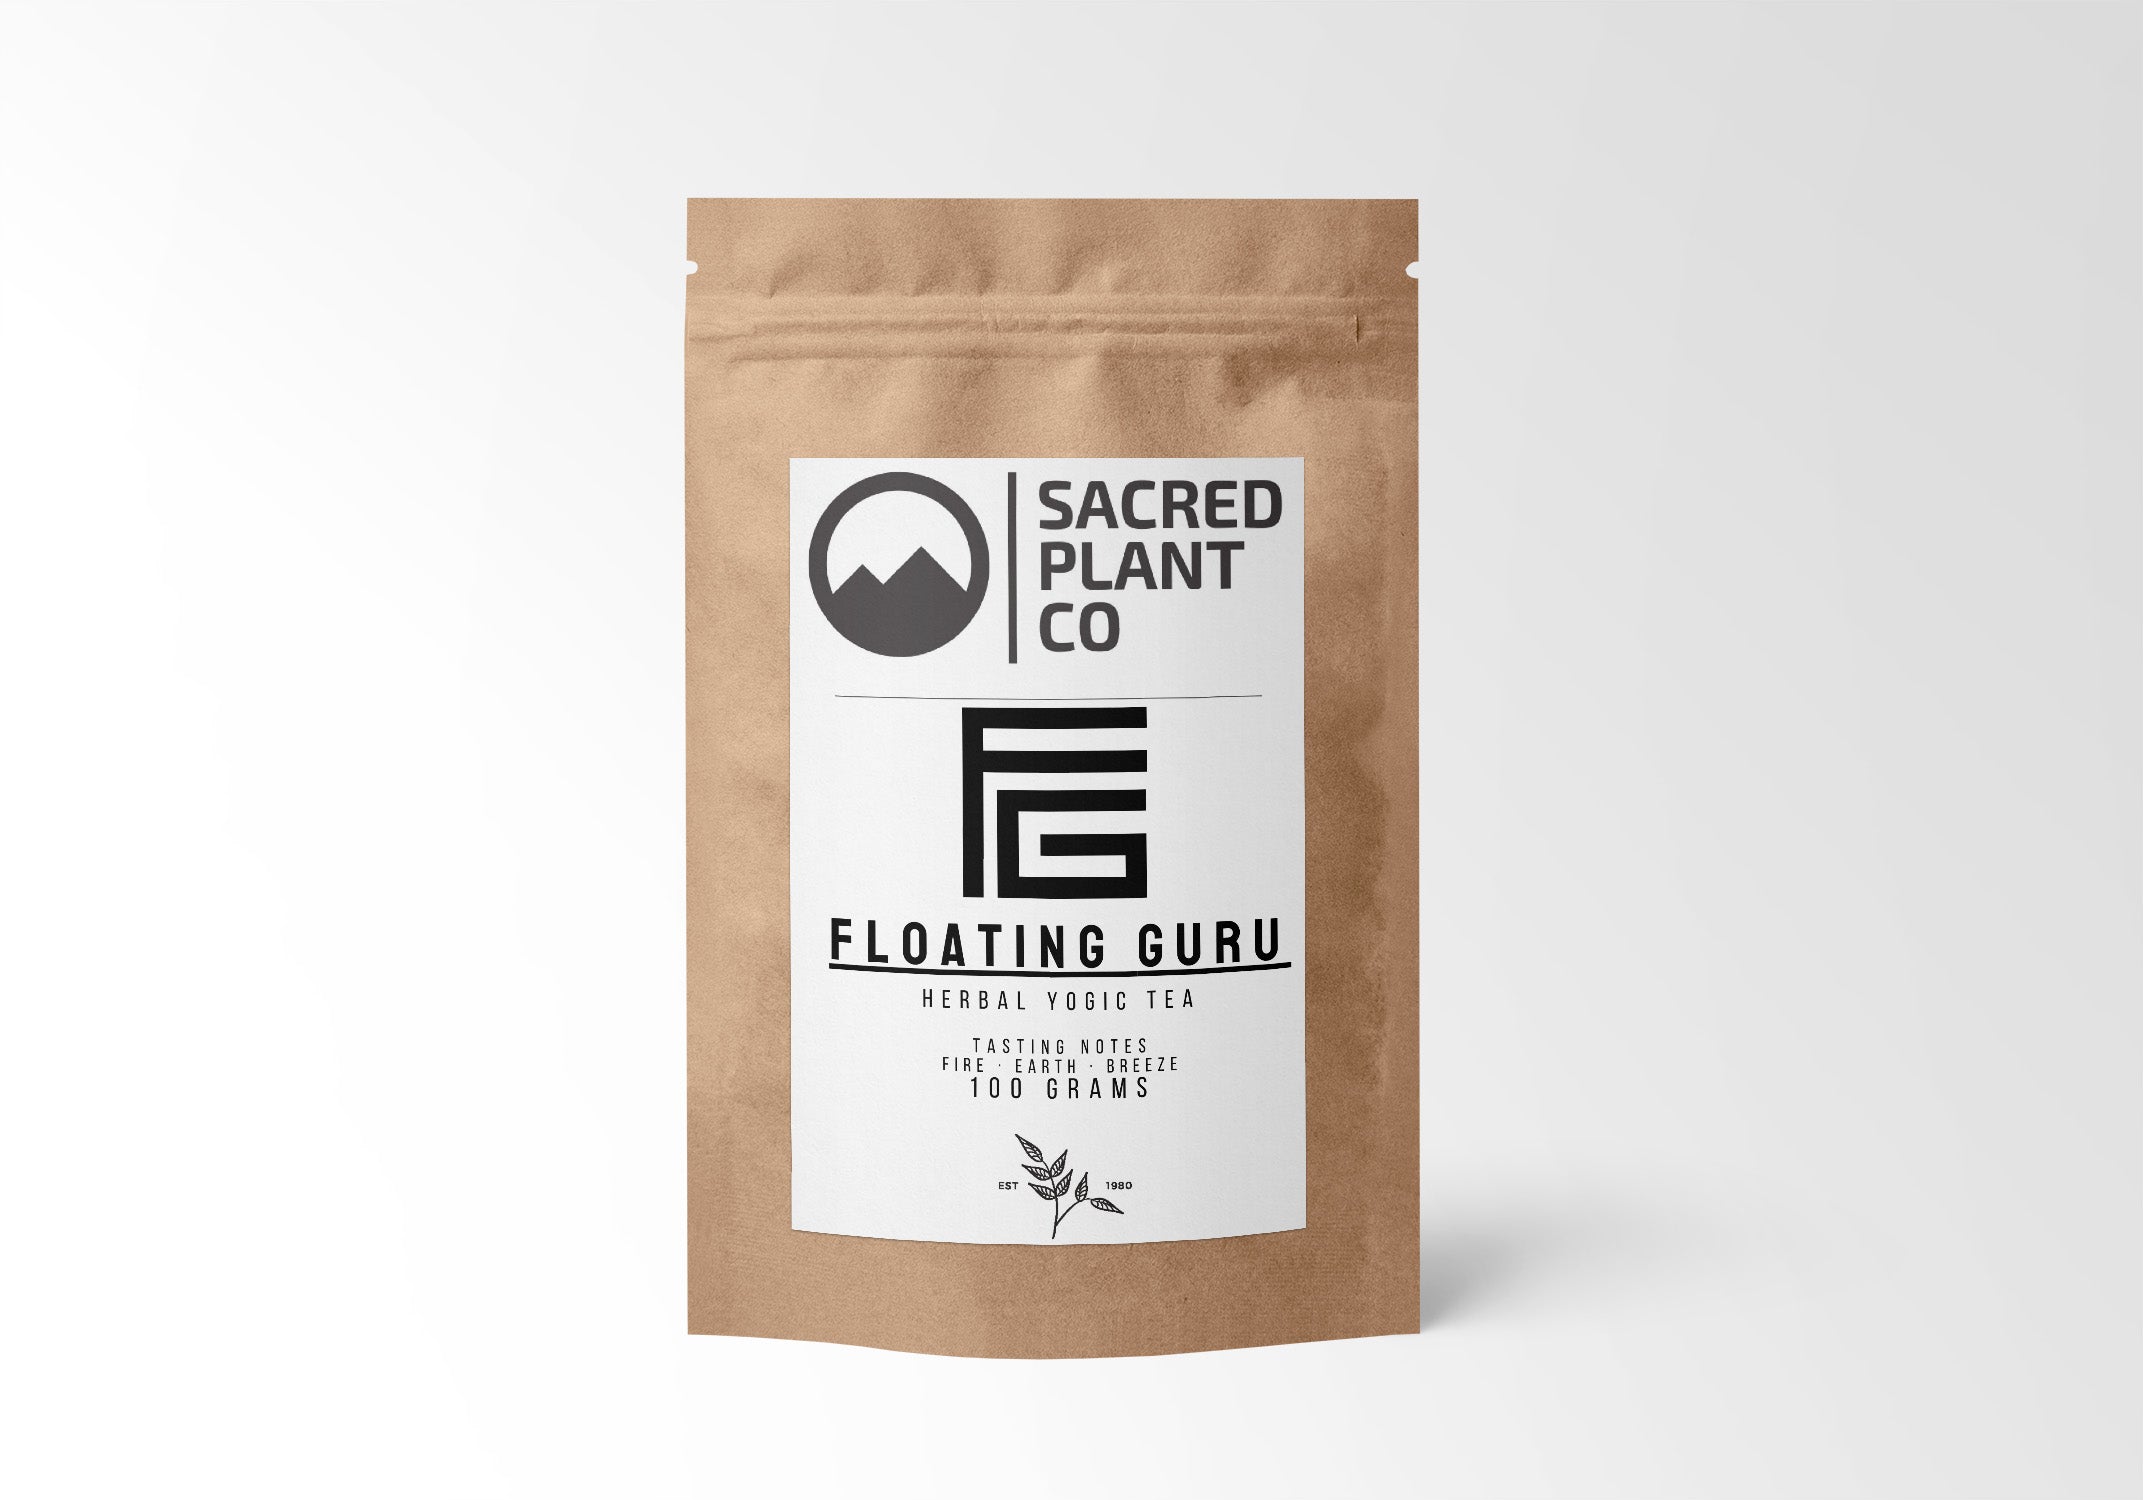 Sacred Plant Co Floating Guru tea package showcasing 50 grams of aromatic herbal yogic tea blend with an elegant black and white label design with ginger, black pepper, cinnamon, cardamom, cordyceps and licorice.